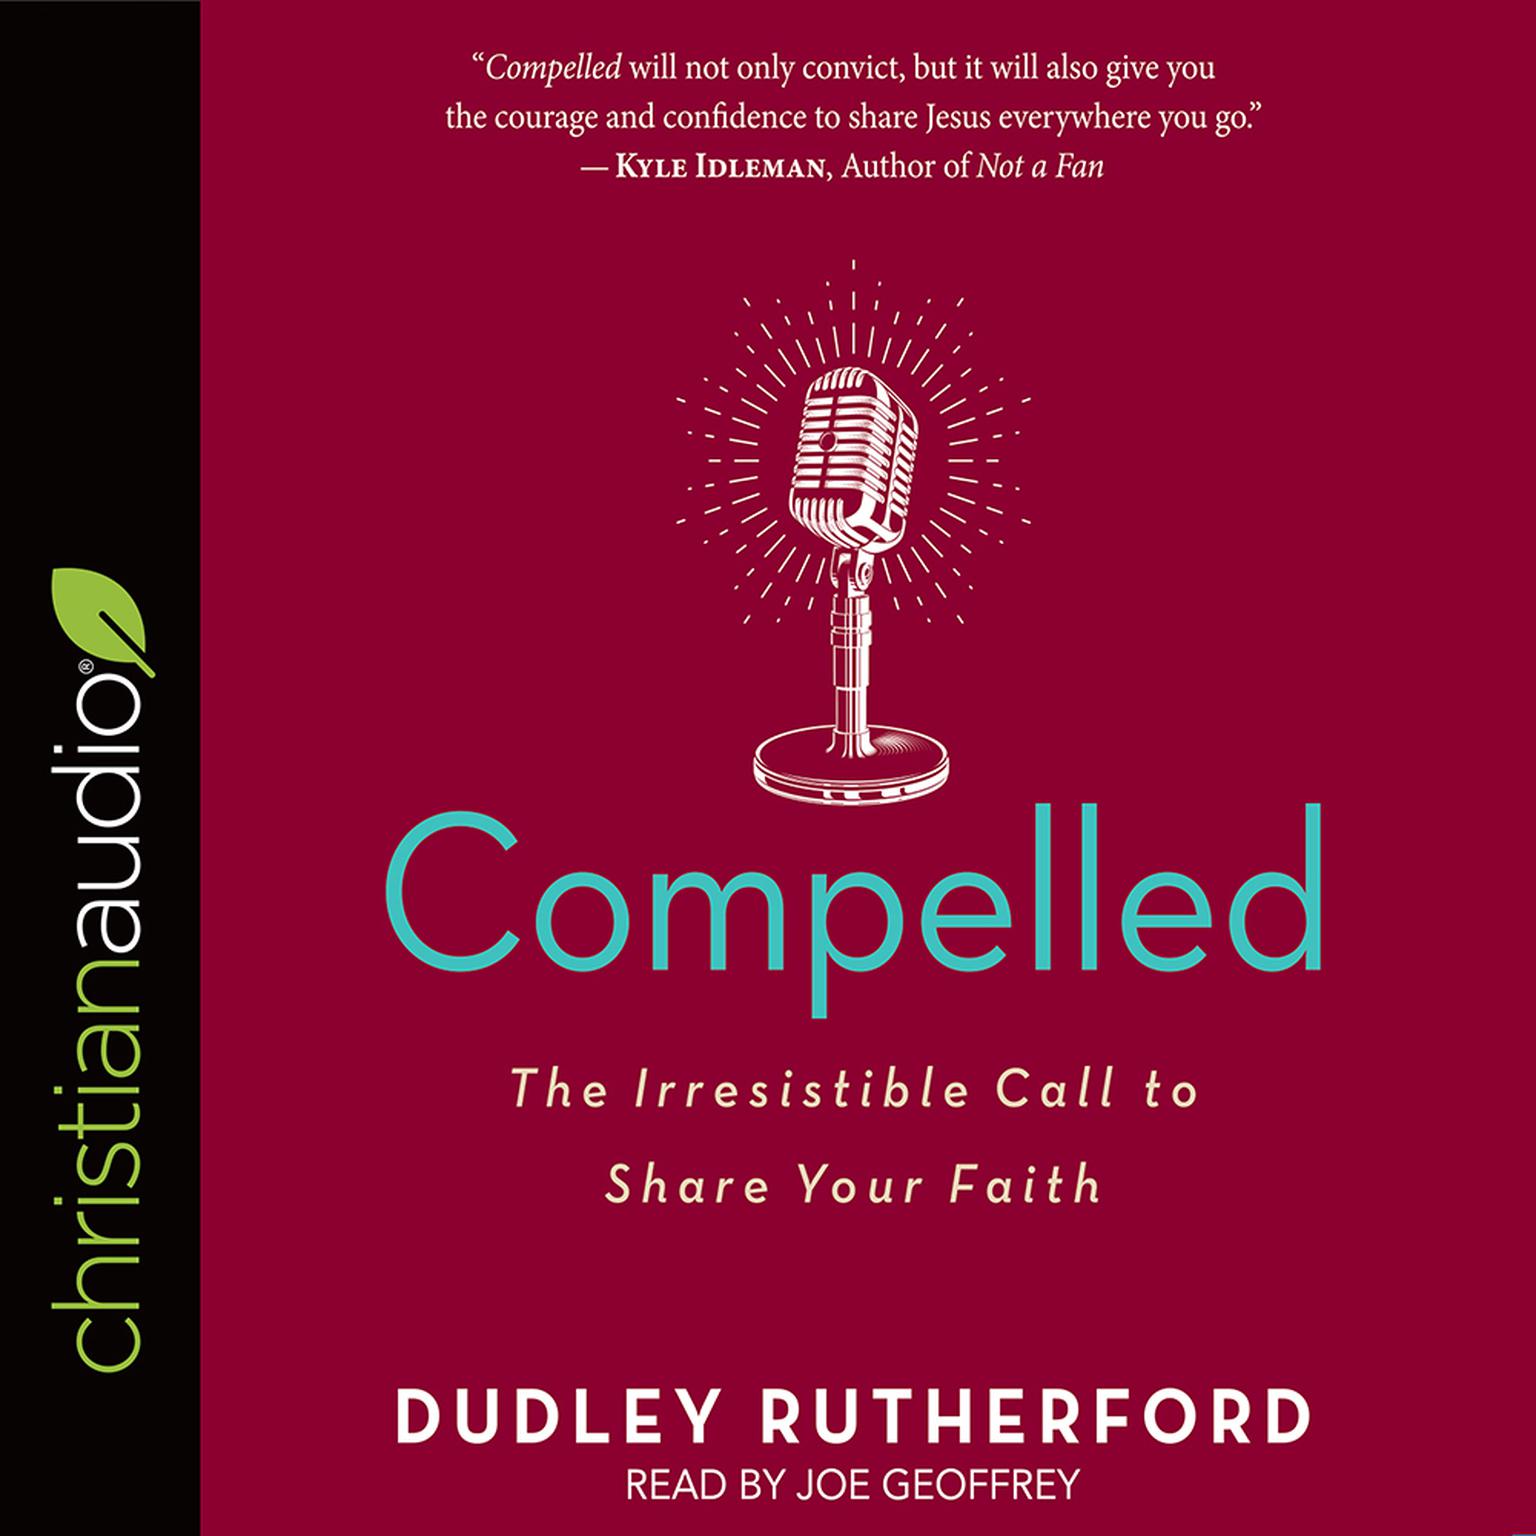 Compelled: The Irresistible Call to Share Your Faith Audiobook, by Dudley Rutherford